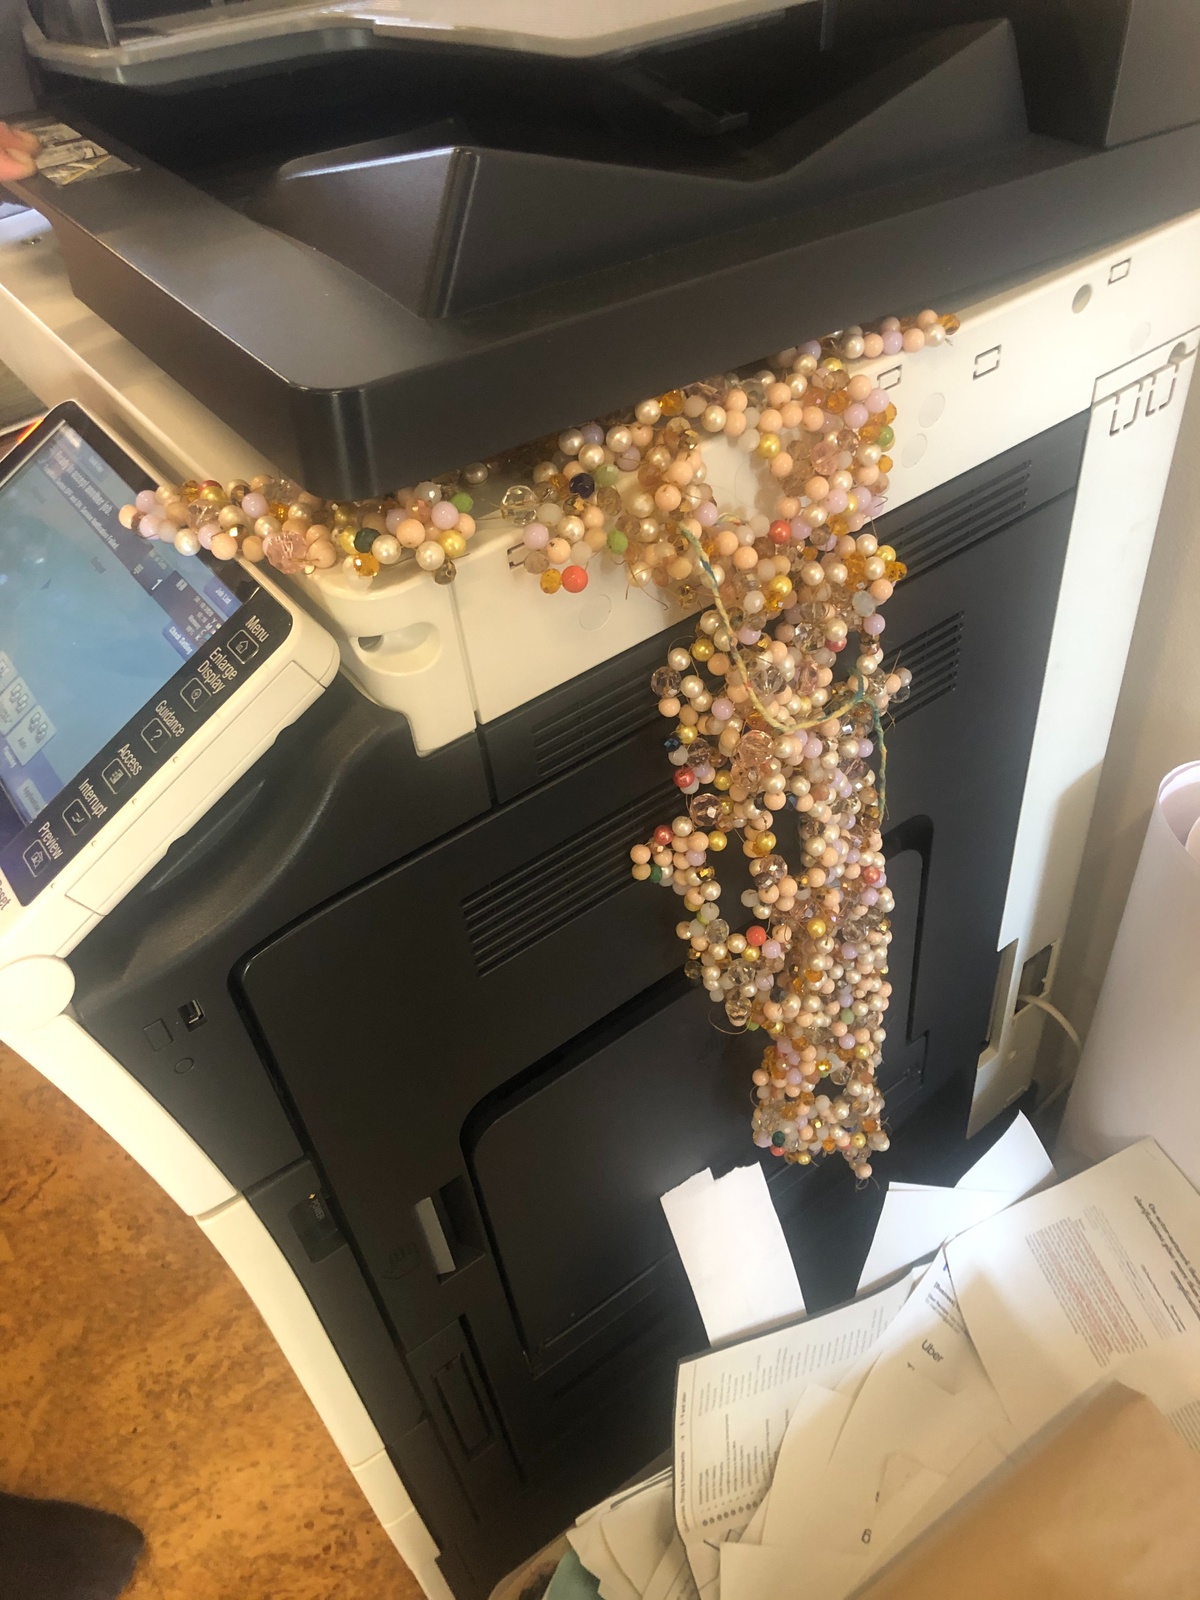 Process photograph from ‘Open Production’, Igshaan Adams’ hybrid studio/exhibition in A4’s Gallery, shows a sample of Adams’ beadwork protruding from the flatbed of A4’s photocopier.
